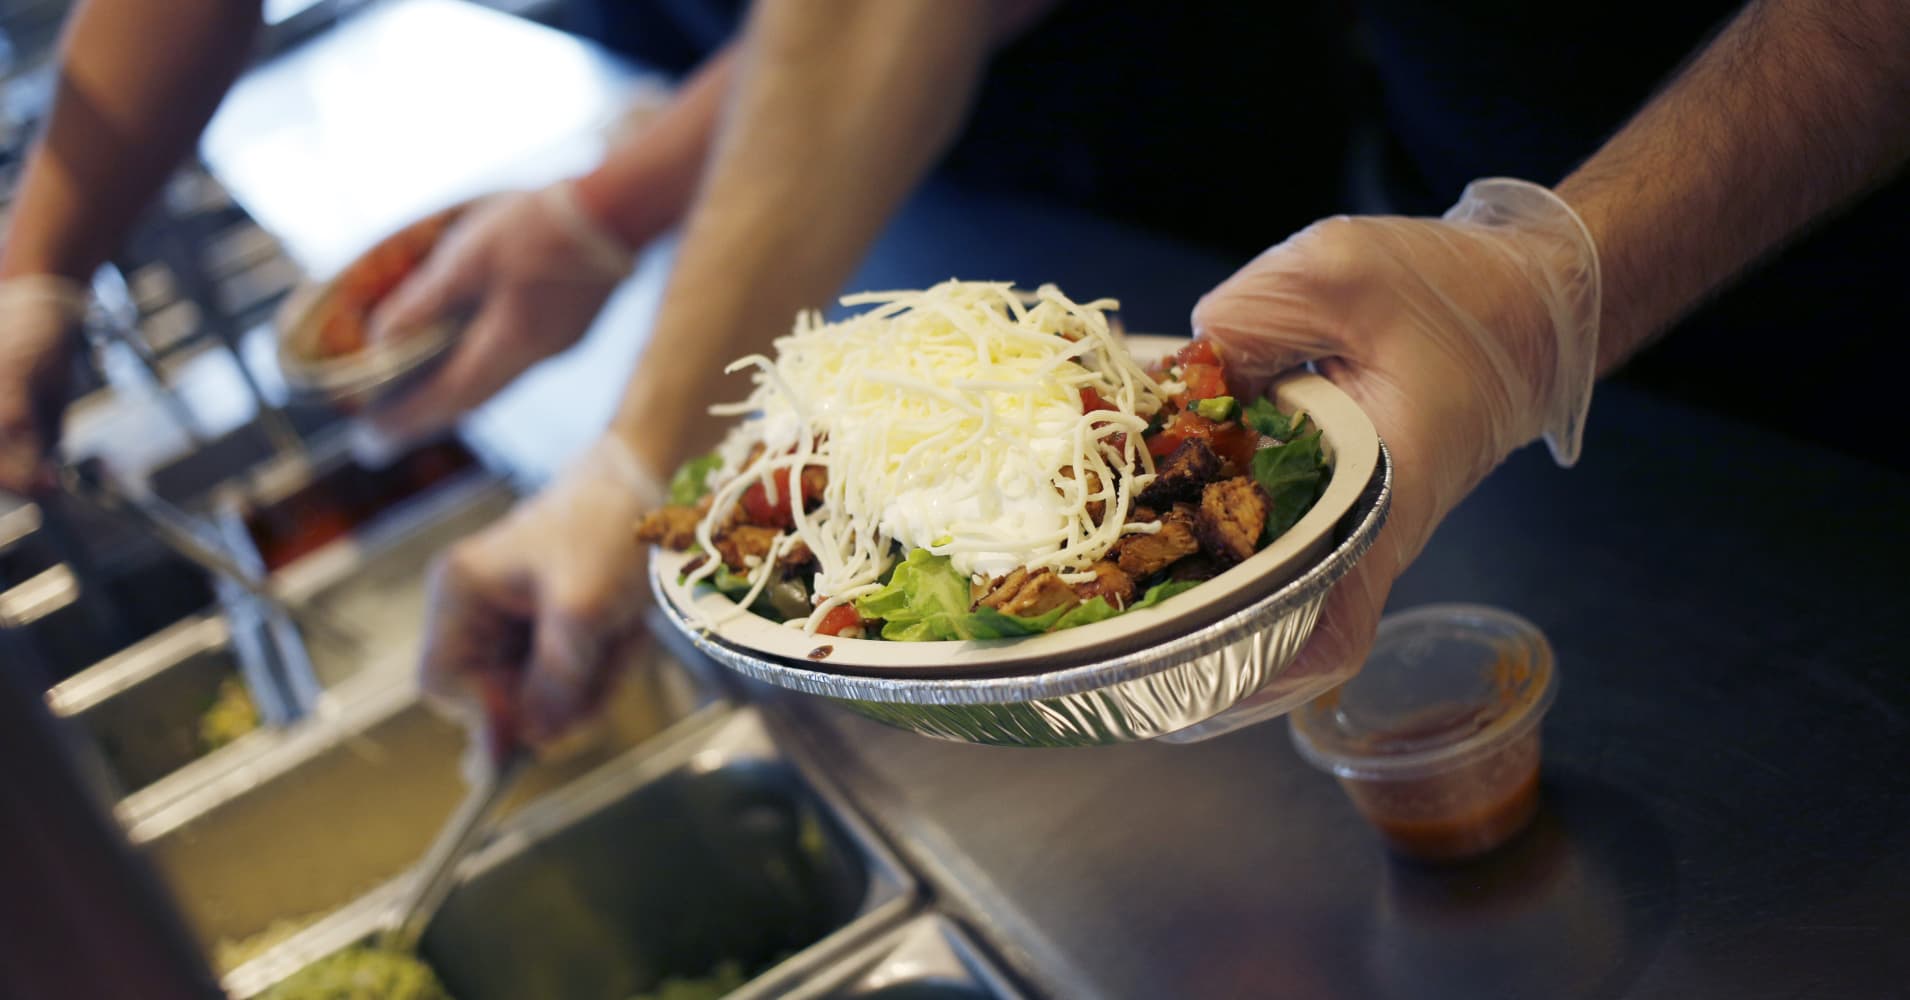 Chipotle's stock drops 6% after disclosing subpoena related to 2018 illness incident